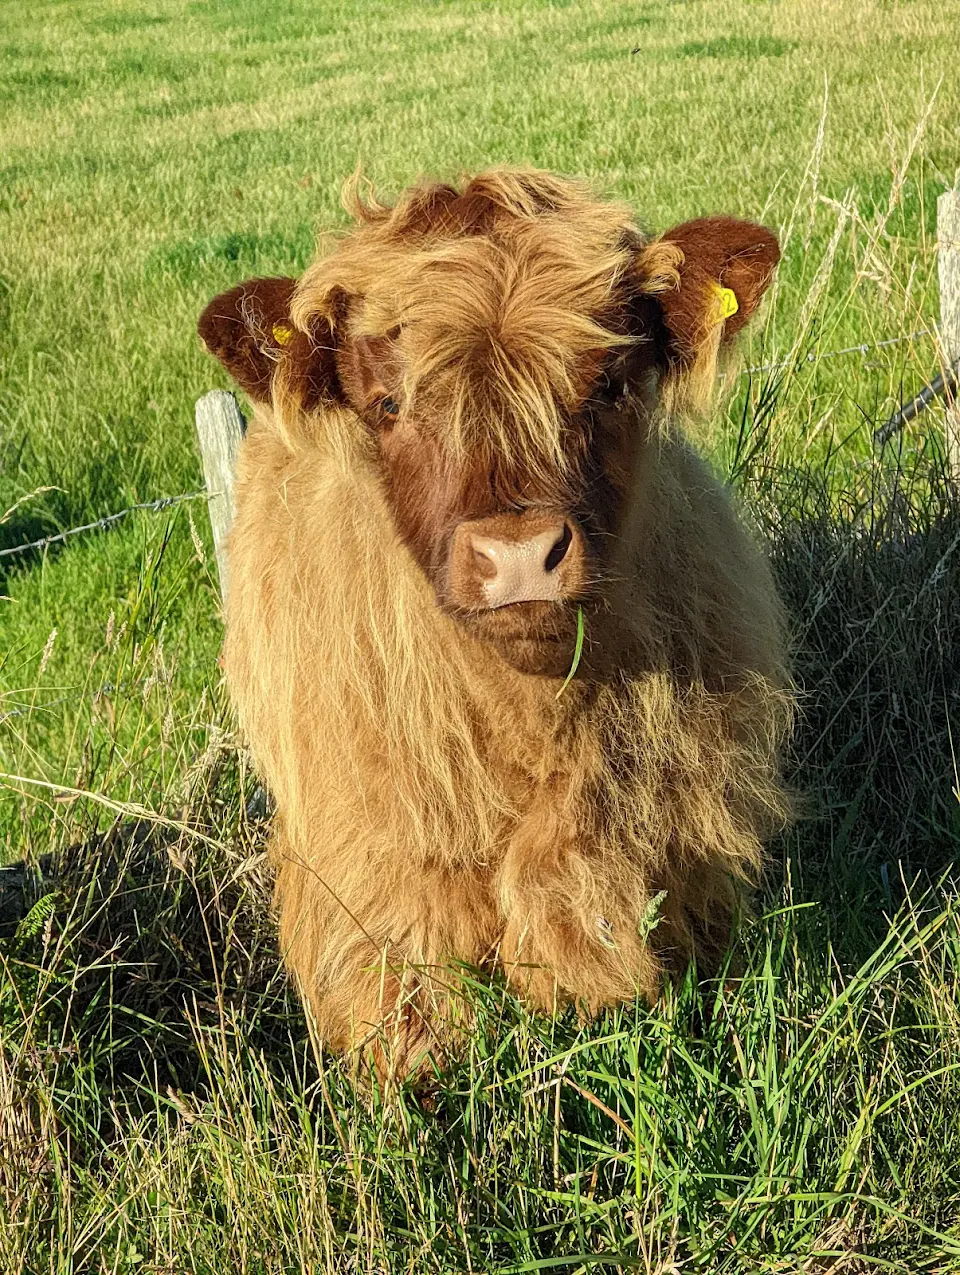 Highland Calf with hair to die for!